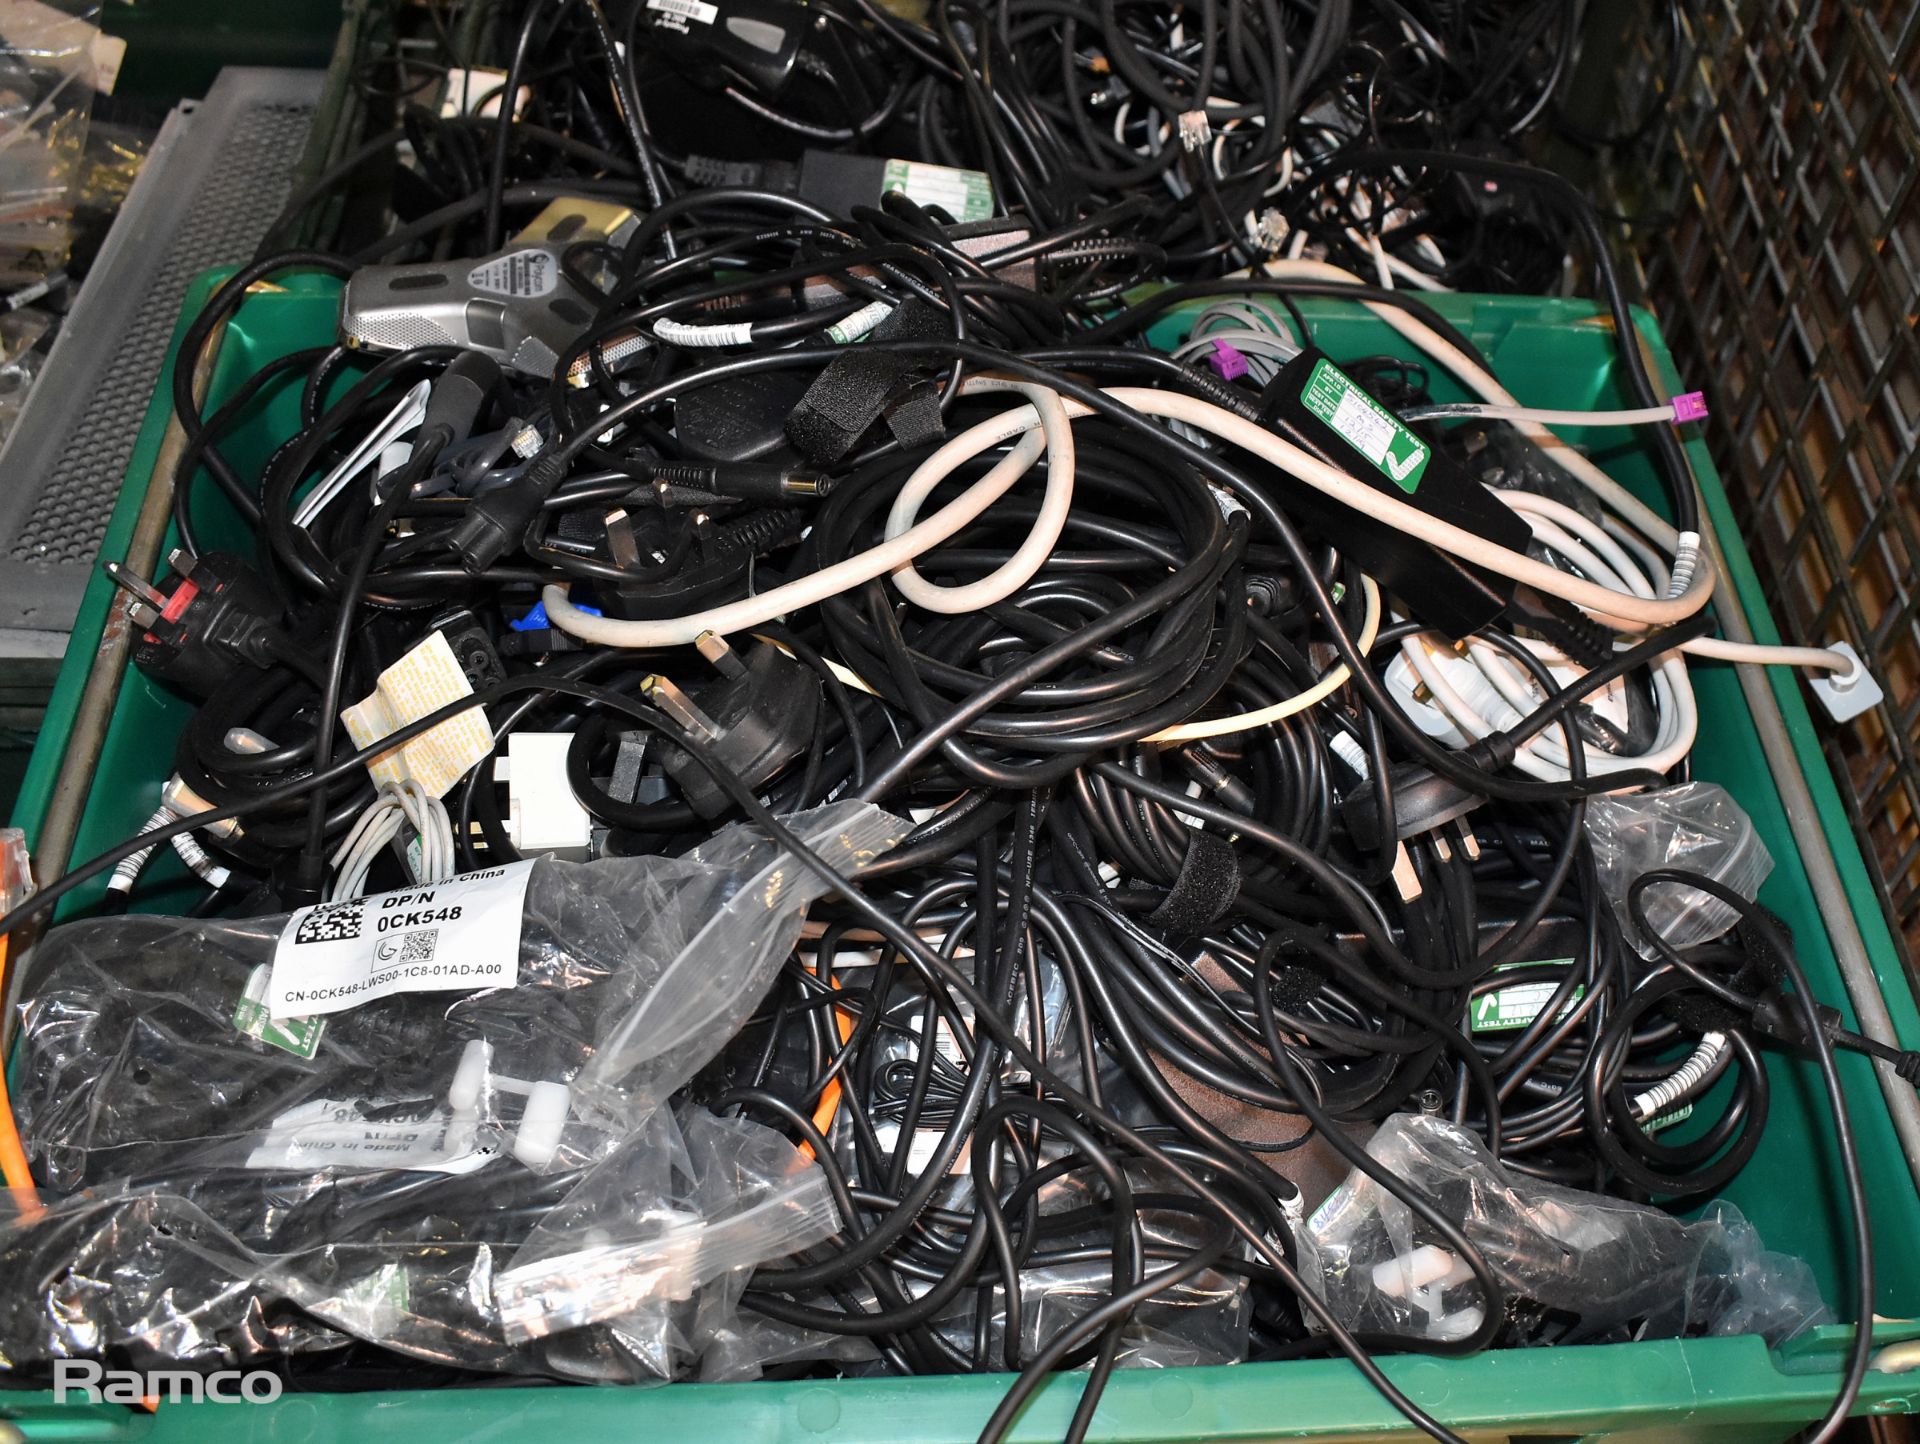 Wires and cables - power cables, AV equipment connections and casing spares - assorted, - Image 4 of 7